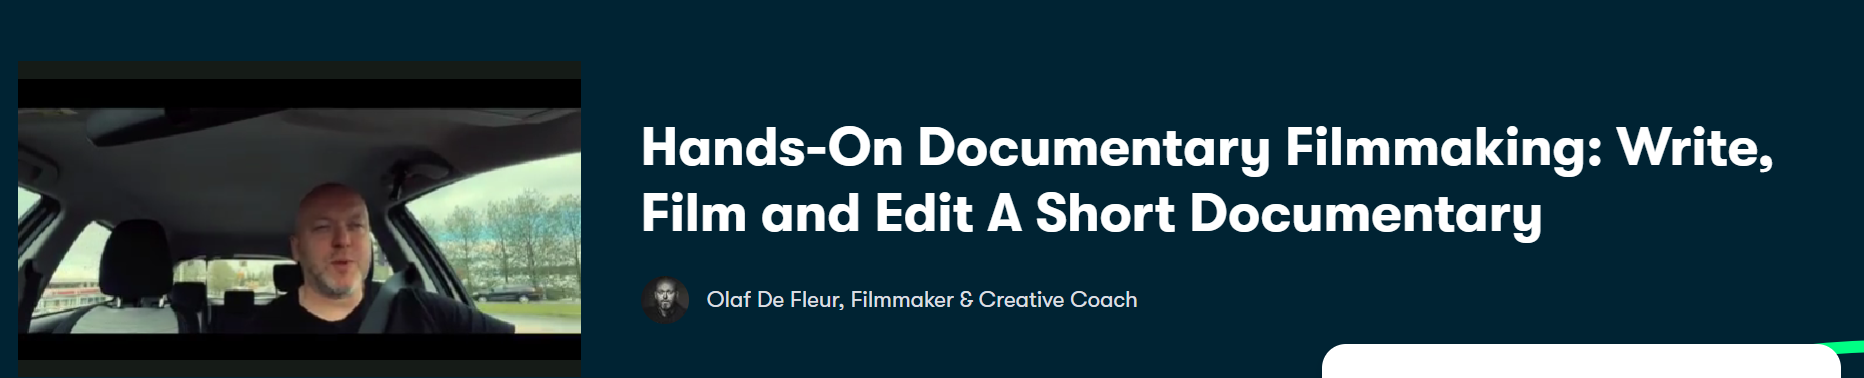 hands-on-documentary-filmmaking.png